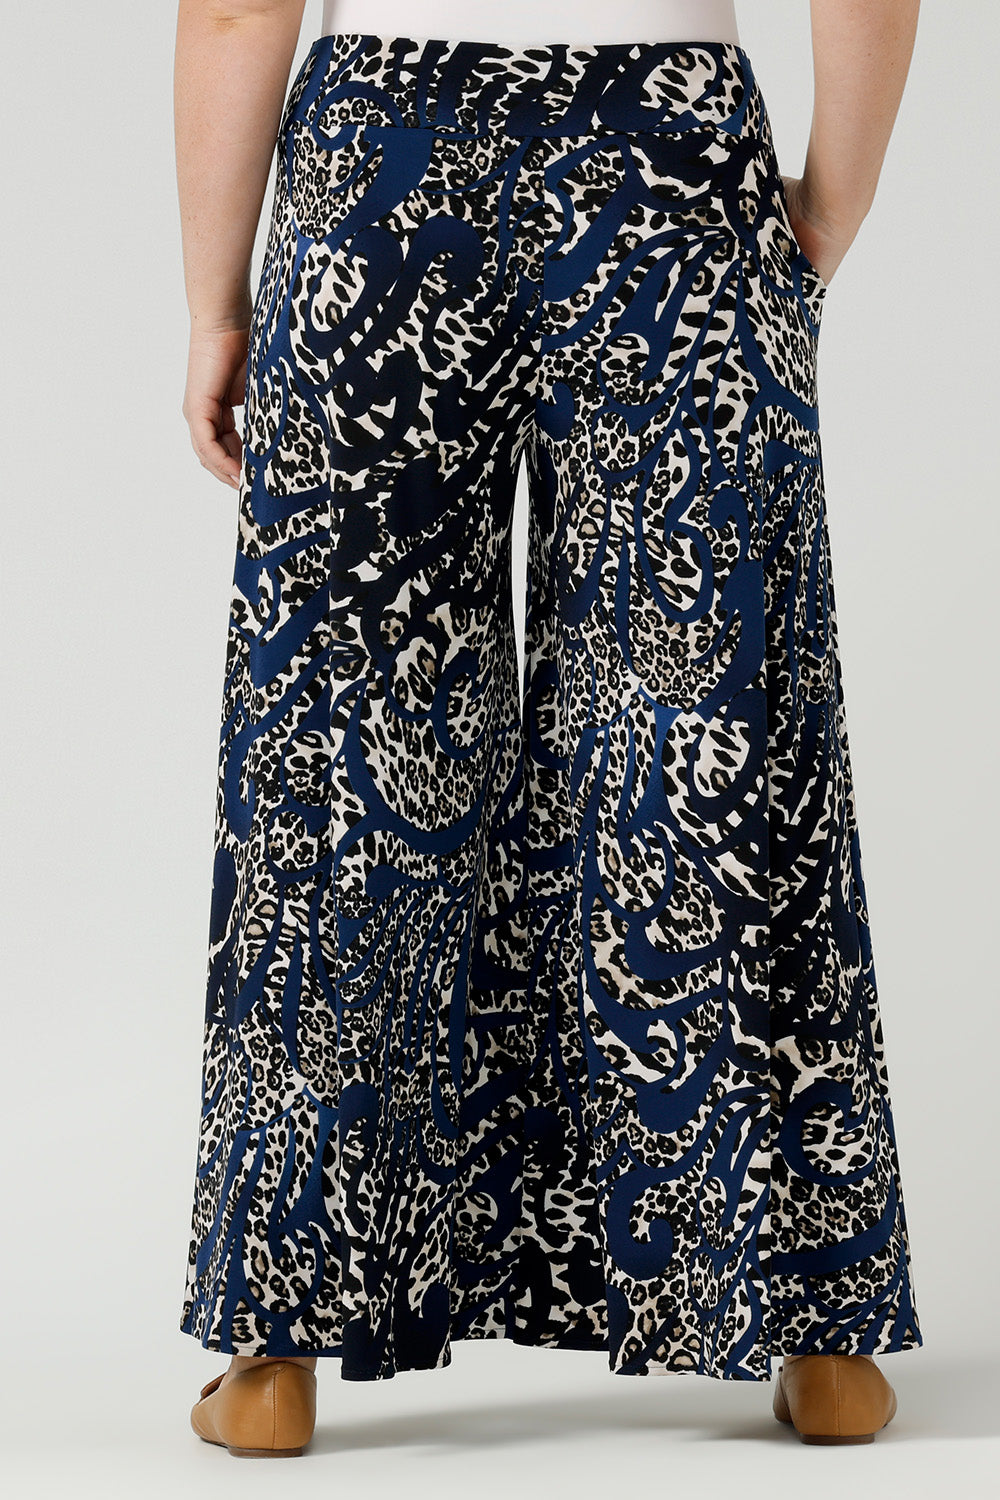 Back view of A curvy size, size 12 woman wears printed wide leg pants with pockets with a navy round neck top. These pull-on, easy care pants are comfortable for your everyday workwear capsule wardrobe. Shop these Australian-made wide leg trousers online in sizes 8 to 24, petite to plus sizes.